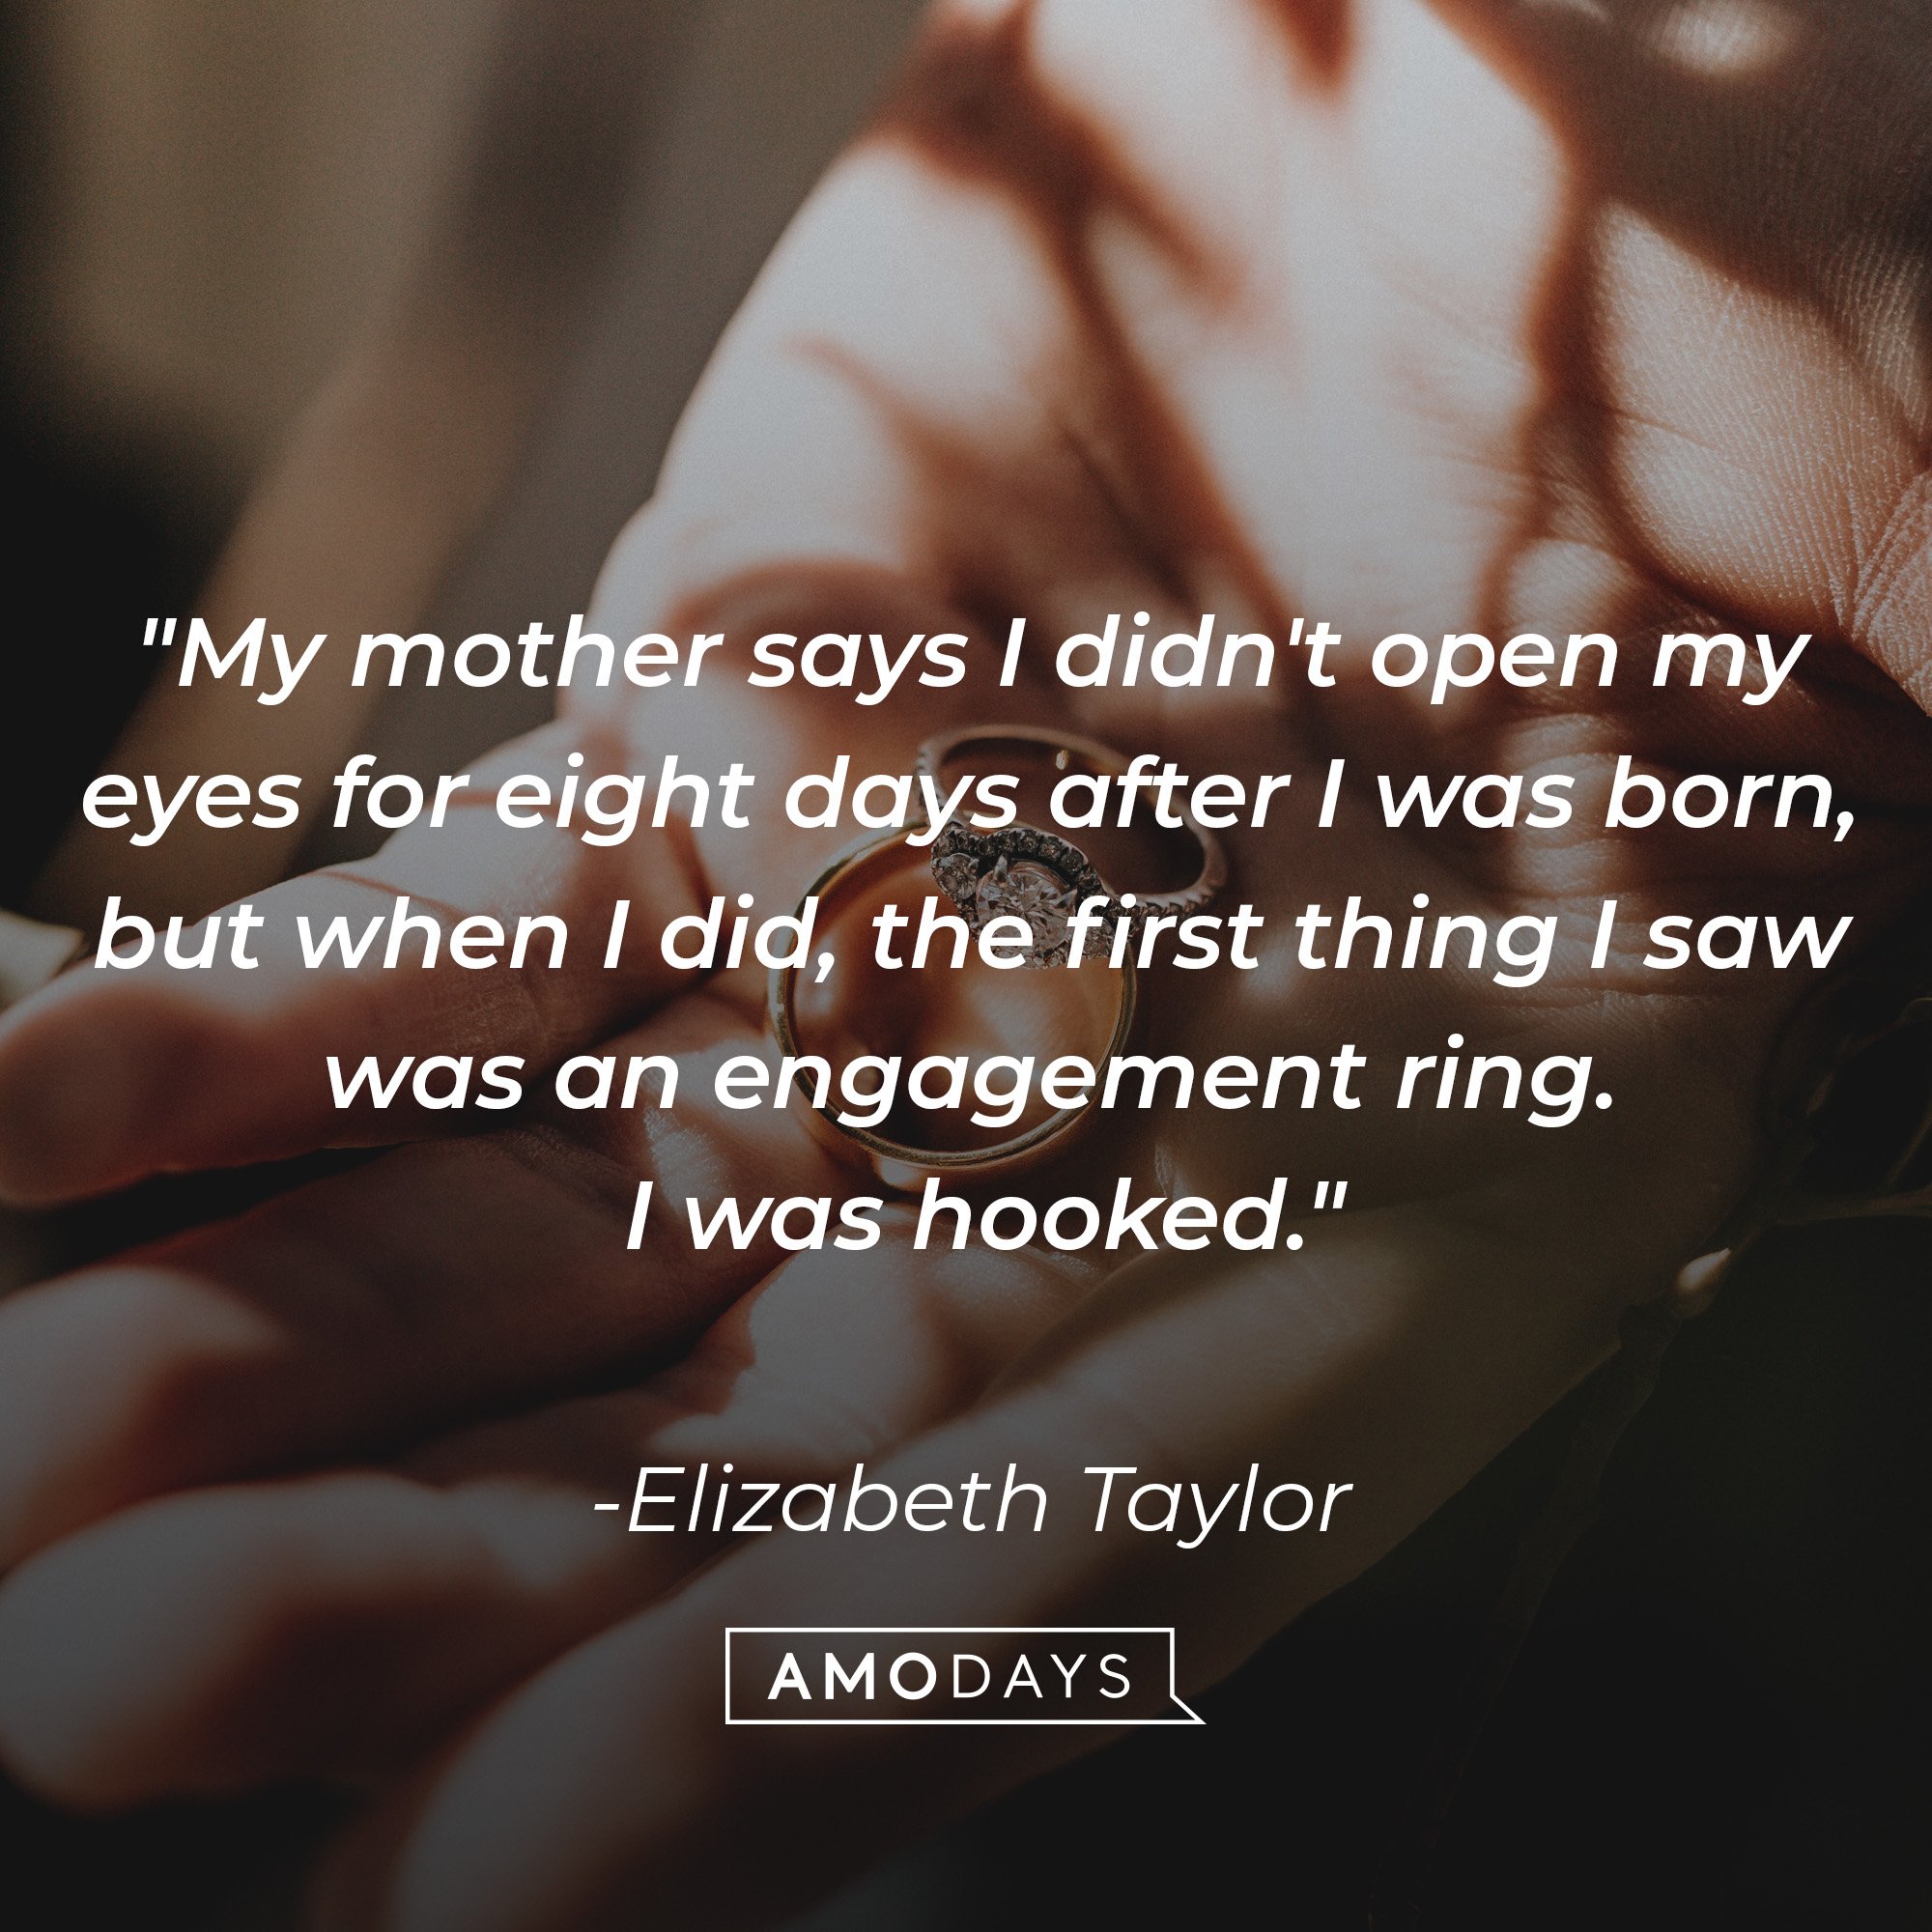 Elizabeth Taylor's quote: "My mother says I didn't open my eyes for eight days after I was born, but when I did, the first thing I saw was an engagement ring. I was hooked." | Image: AmoDays